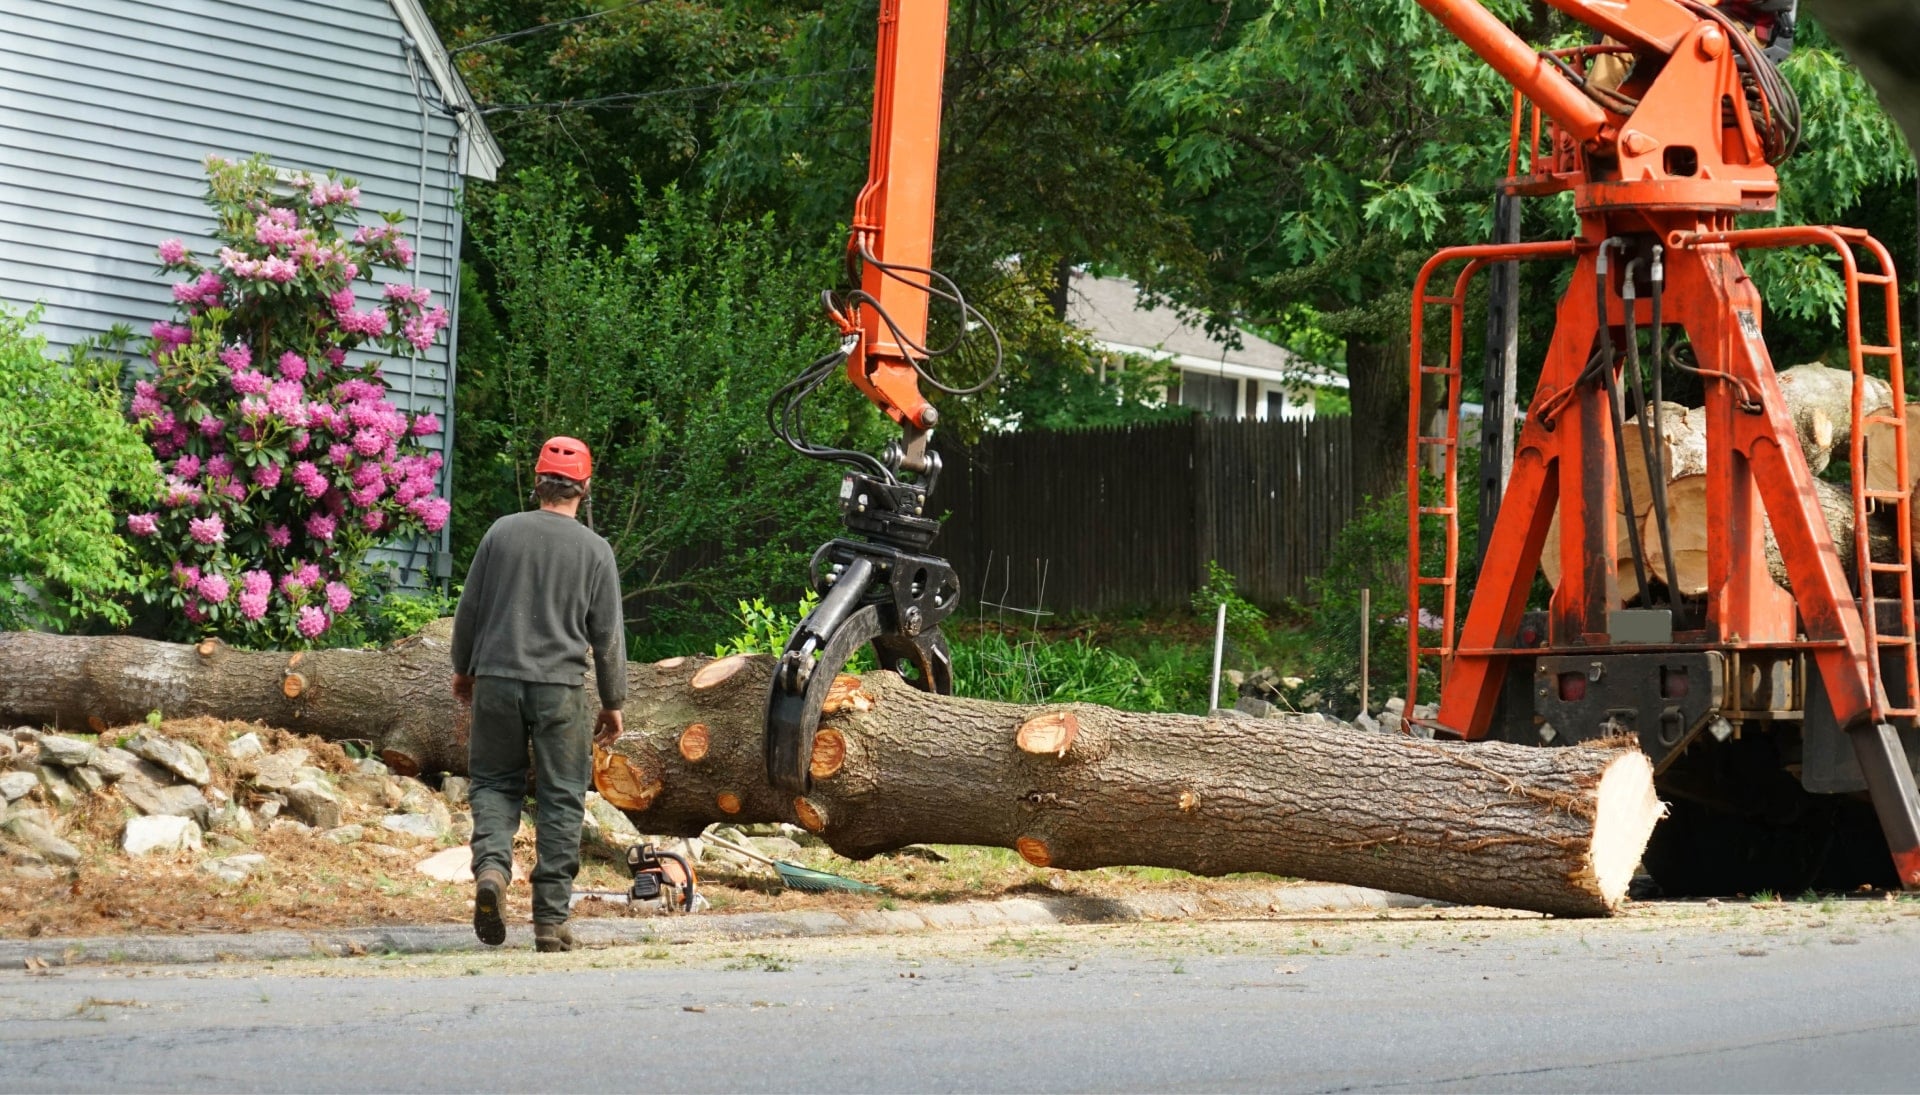 Local partner for Tree removal services in Grand Rapids